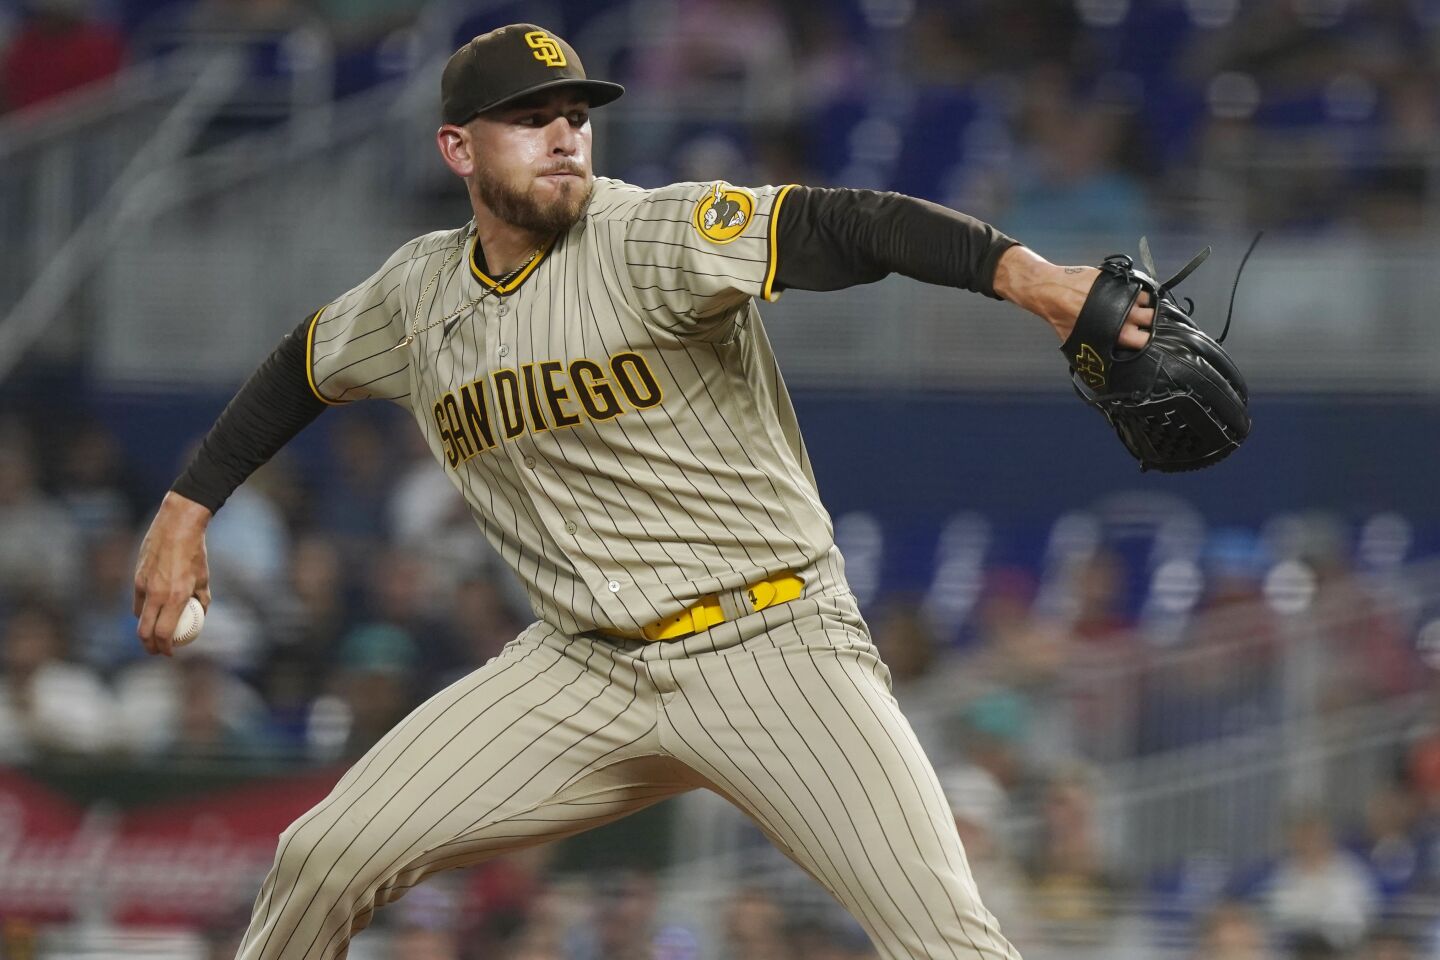 Game 3: Padres RHP Joe Musgrove (8-6, 2.98 ERA)Musgrove is coming off back-to-back quality starts (2.77 ERA), although he lost Monday’s start in Miami (6 IP, 3 ER). He has a 6.86 ERA in 21 career innings against the Nationals, including allowing nine runs in 10 innings last year.